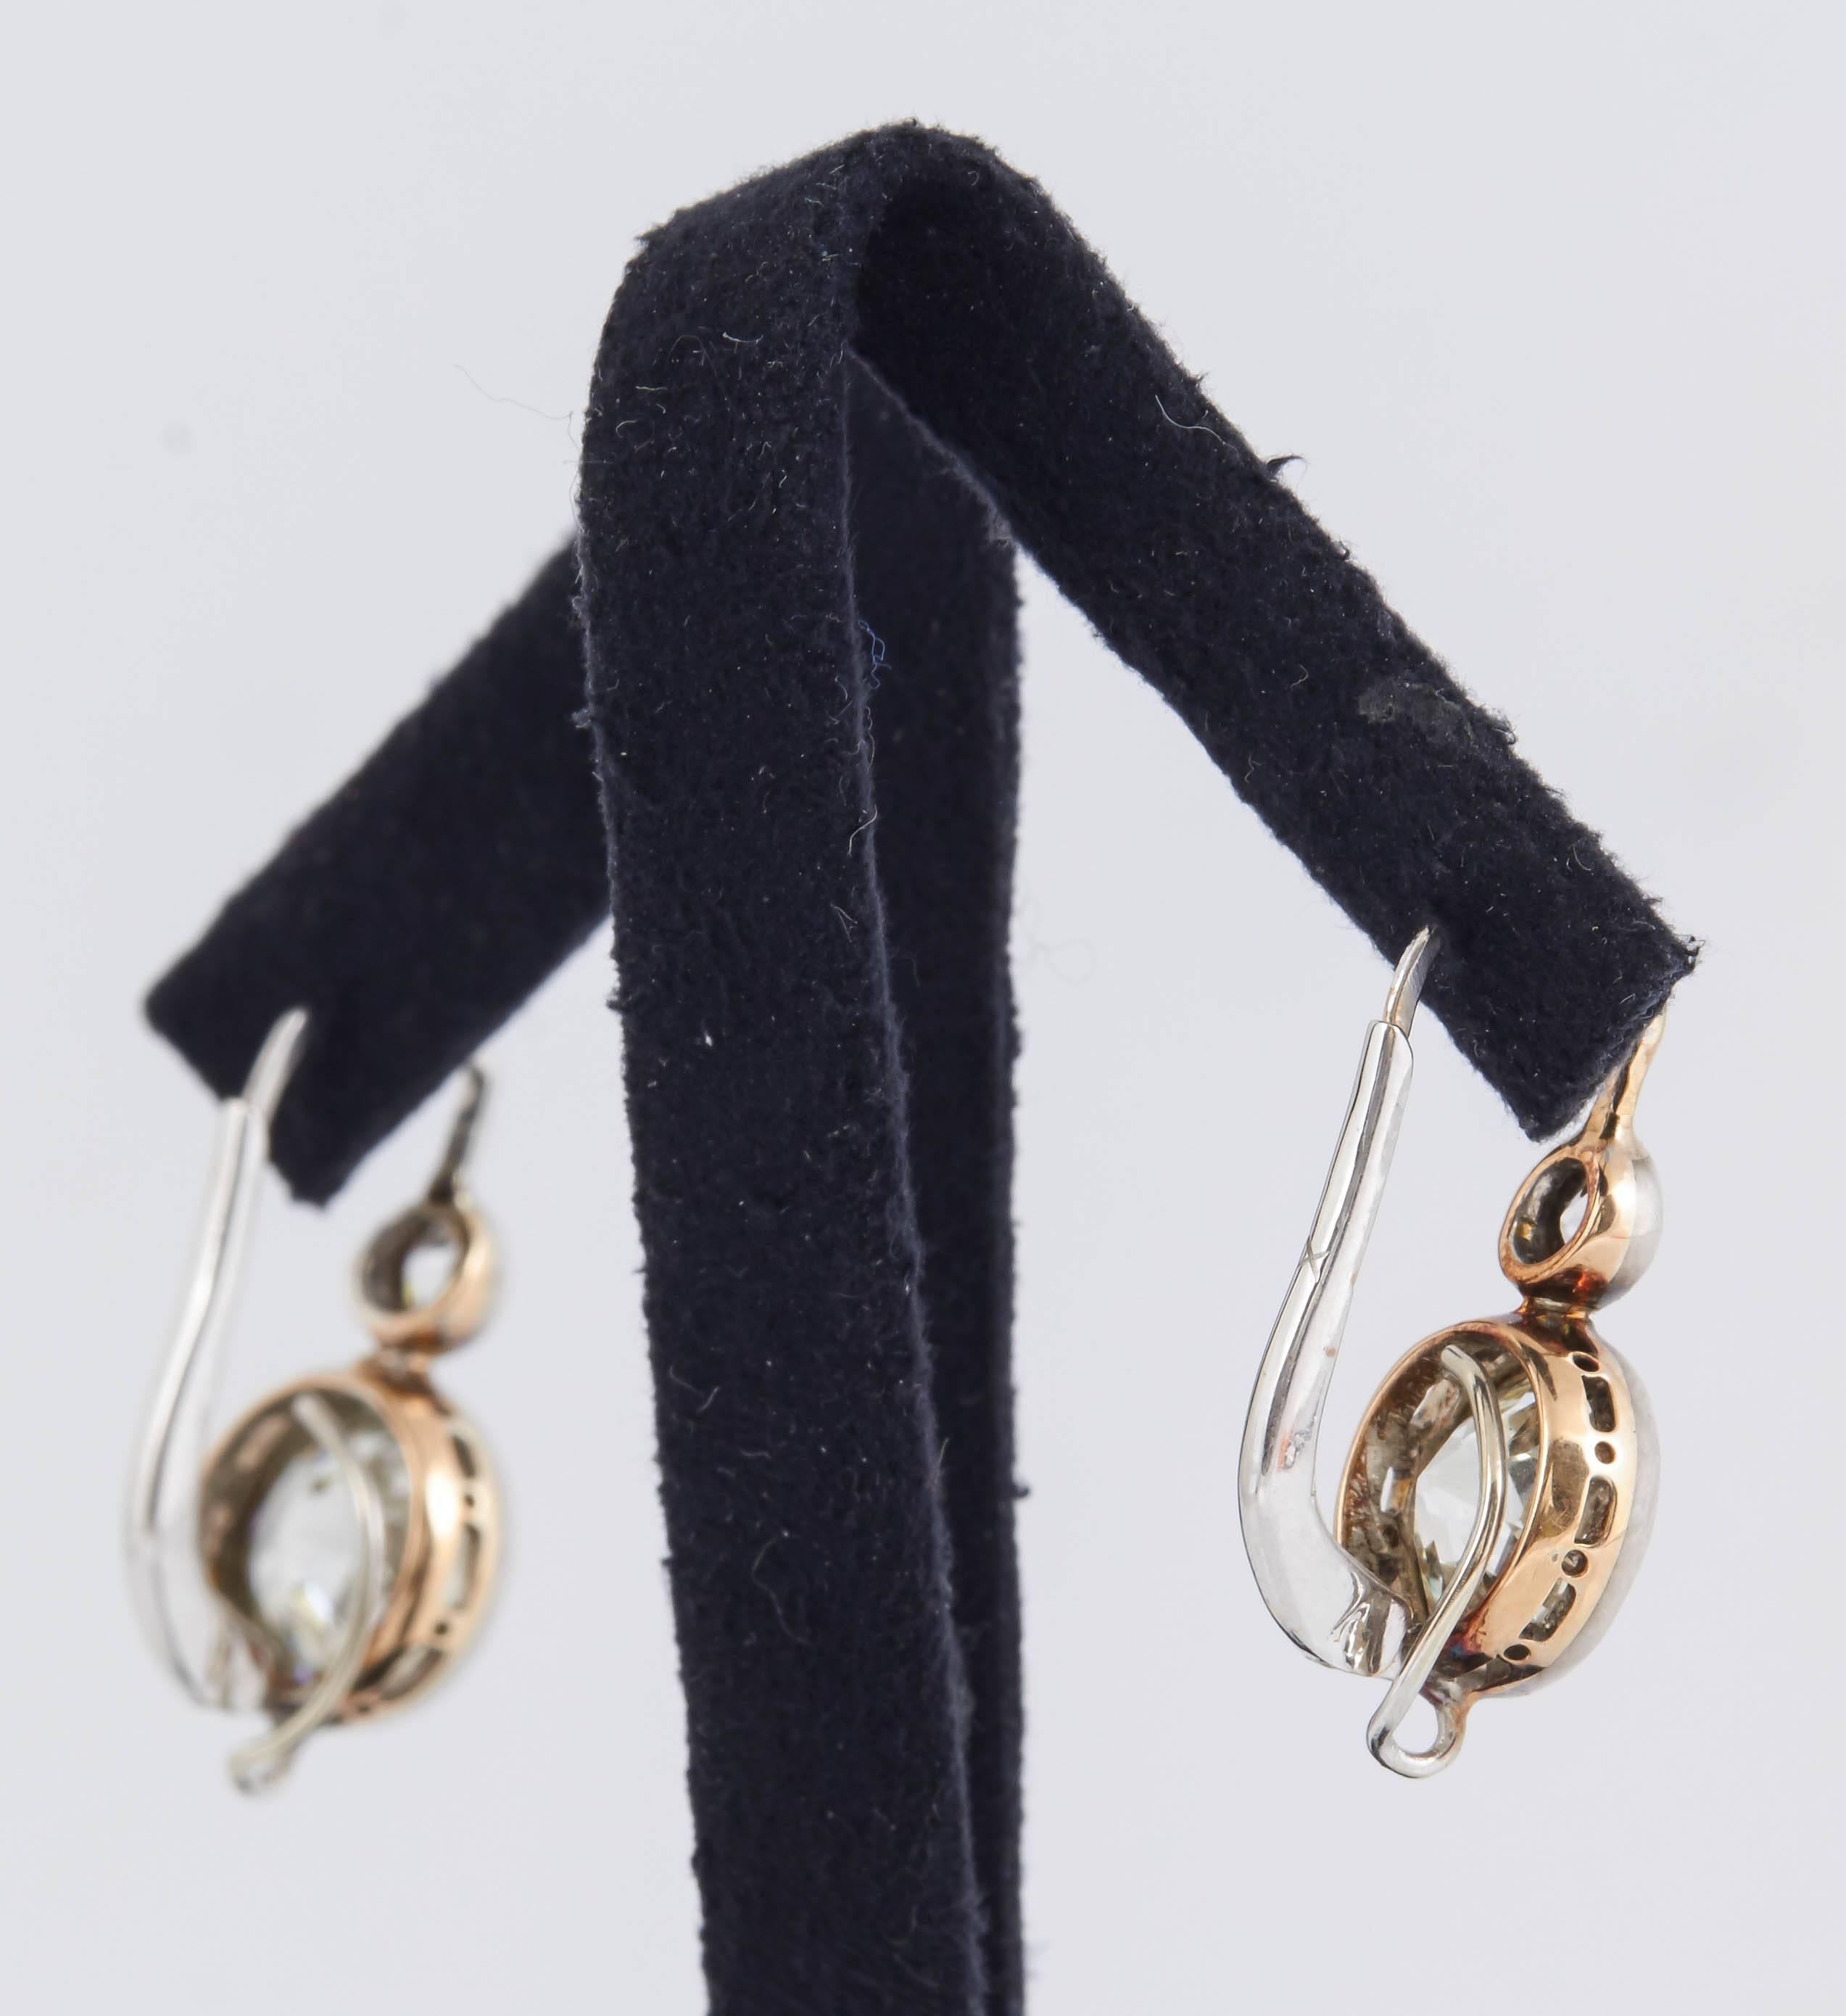 Art Deco two stone earrings backed in gold and topped in platinum. Each earring centers 1 larger old European-cut diamond suspended from 1 smaller old European-cut diamond. Larger Stones weigh a total of 7.00 carats, smaller stones weigh a total of